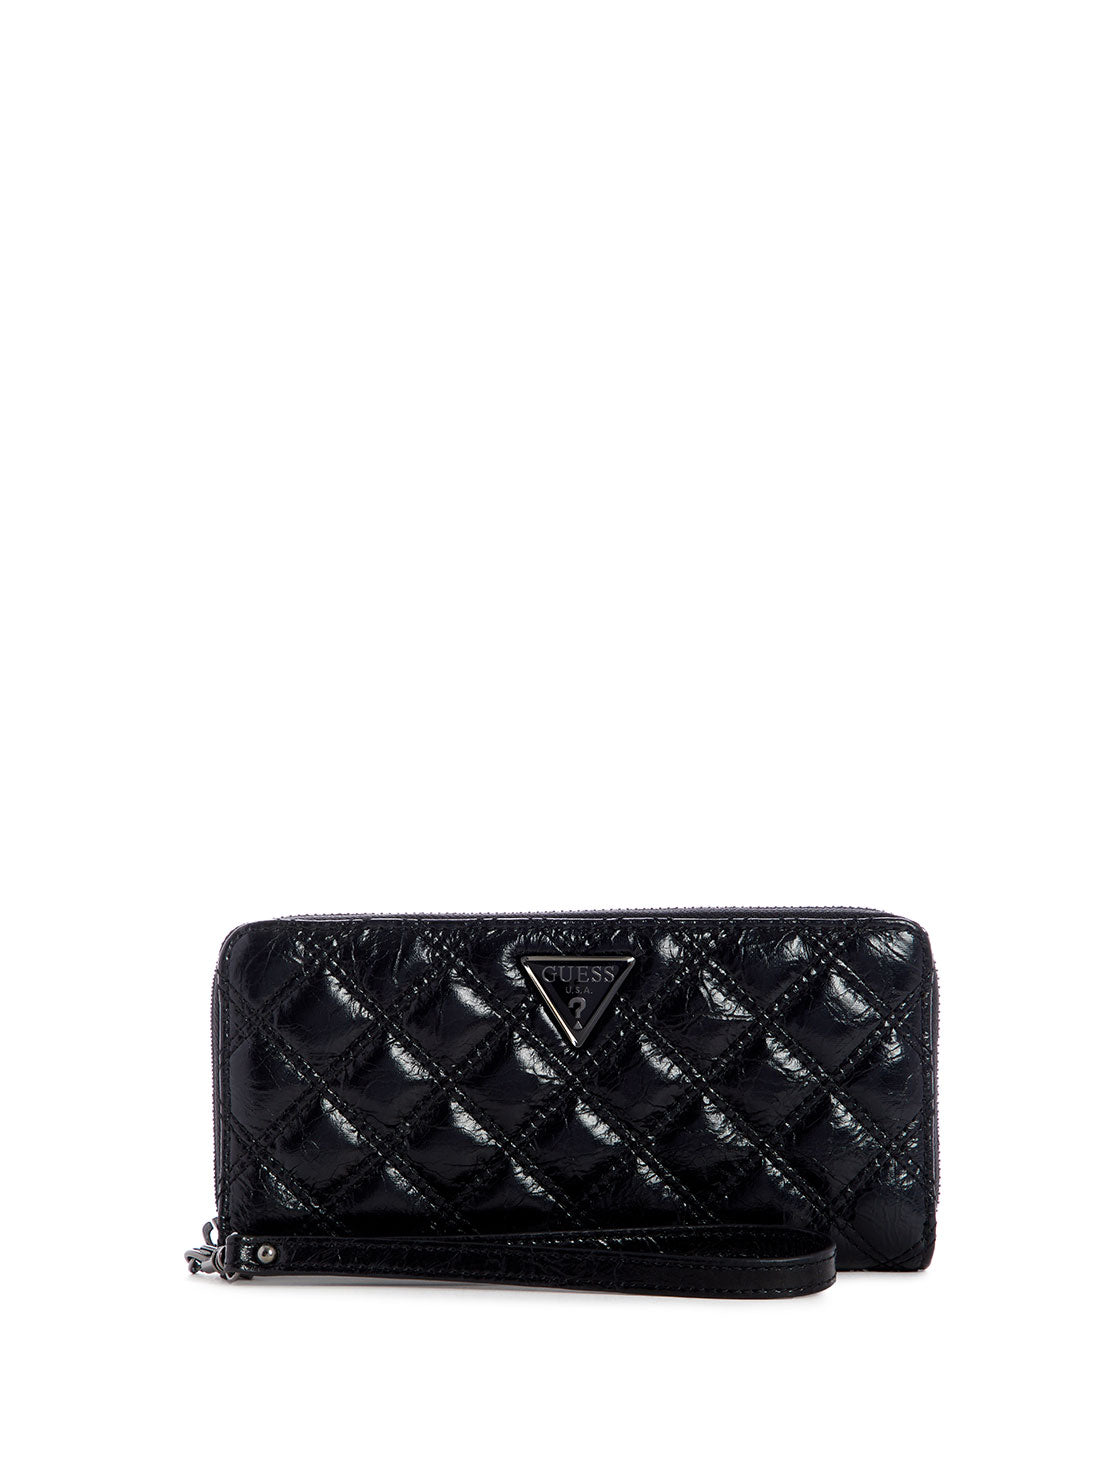 guess Patent Black Cessily Large Womens Wallet front view